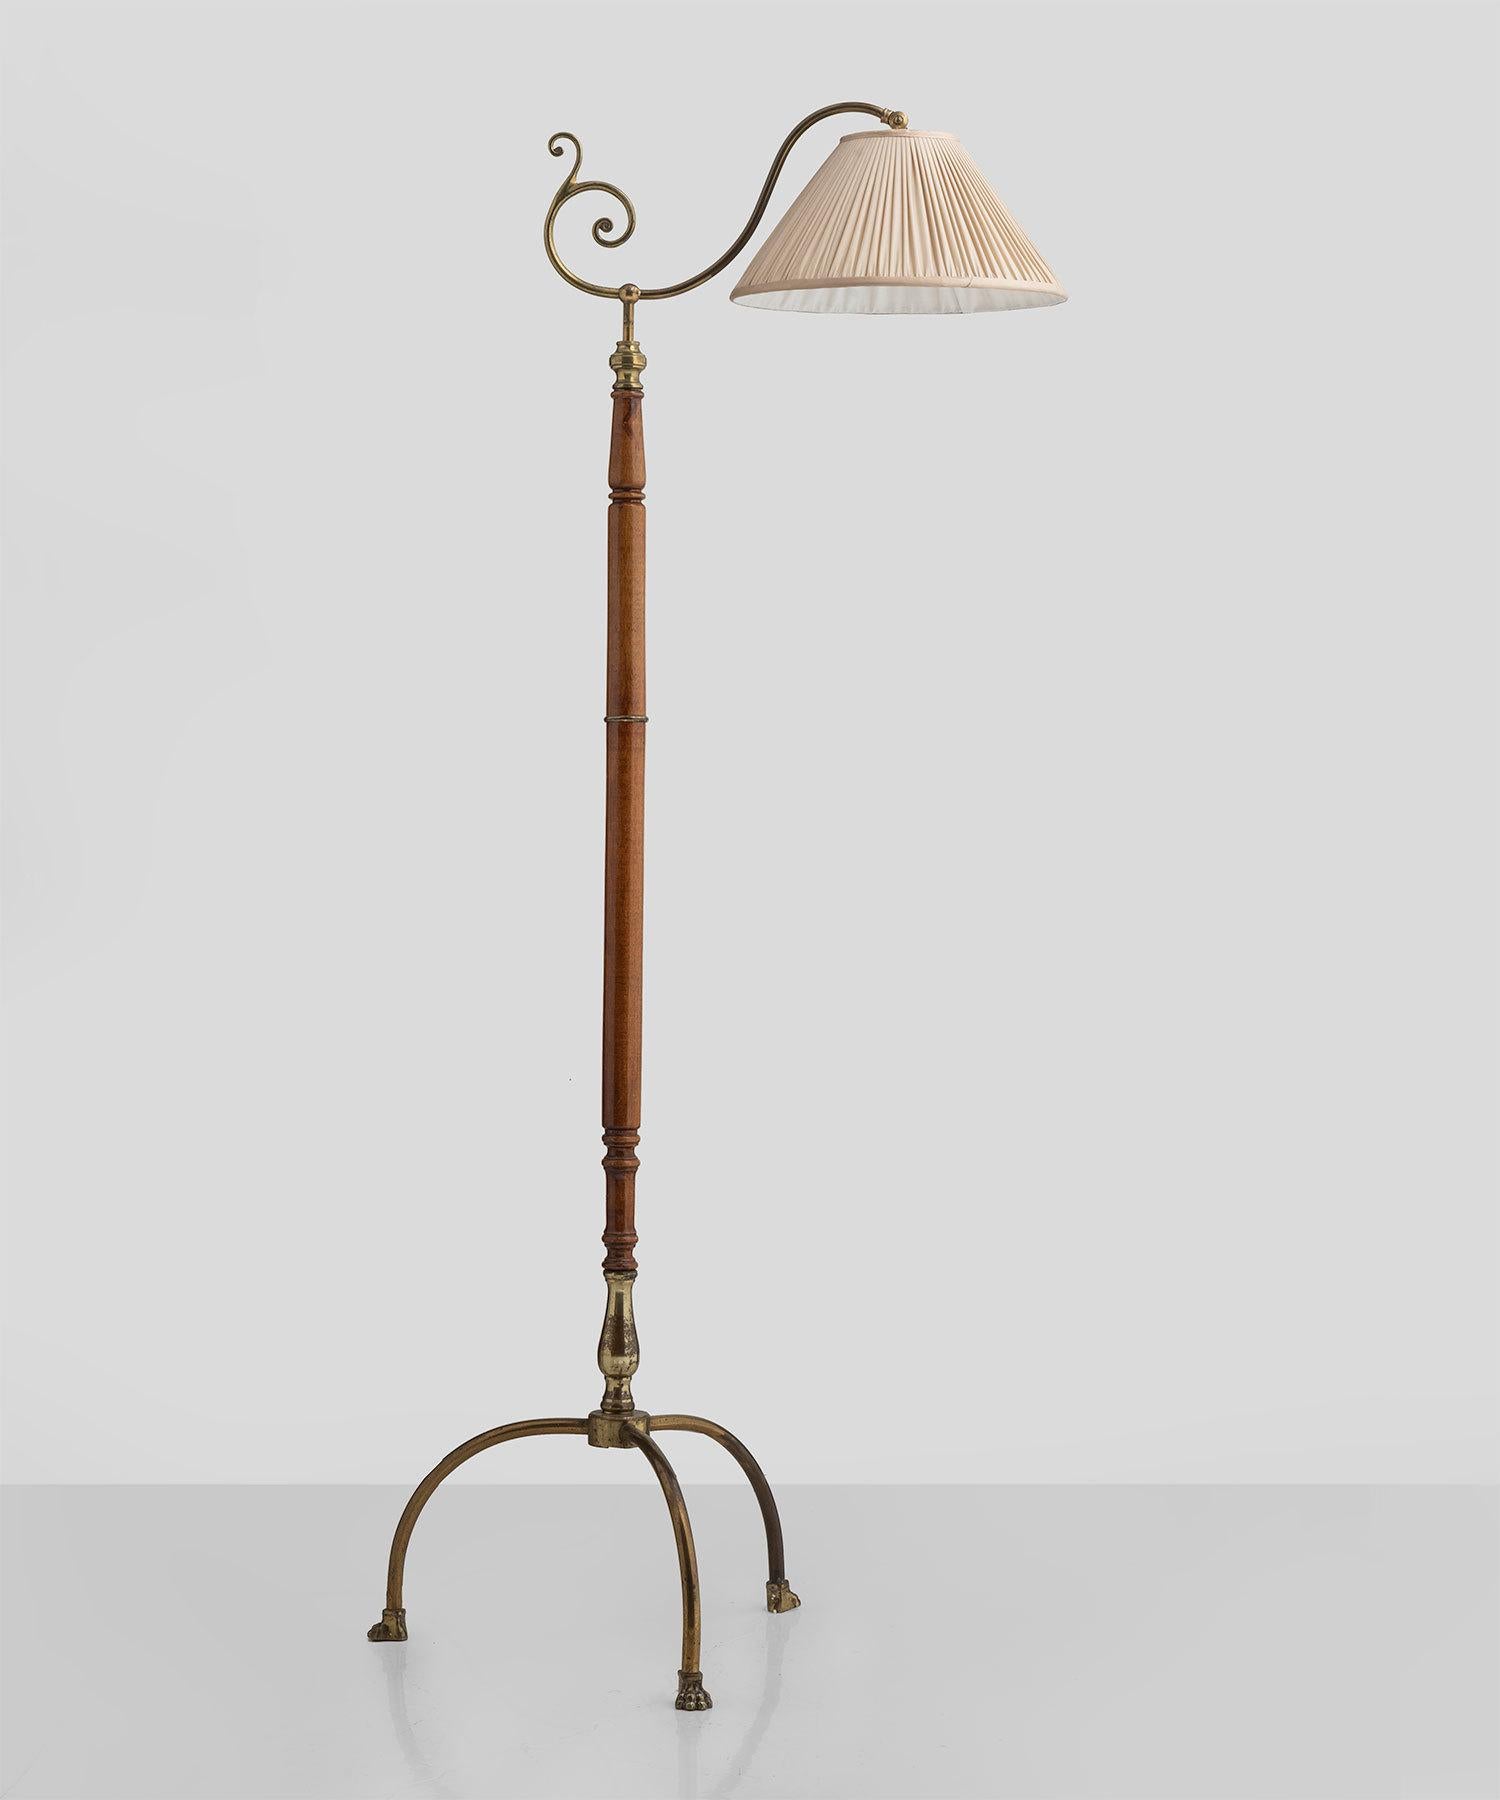 Adjustable reading lamp with claw feet, France, circa 1930

Polished wood stem and brass swan neck, standing on three, splayed claw feet.

Measures: 54